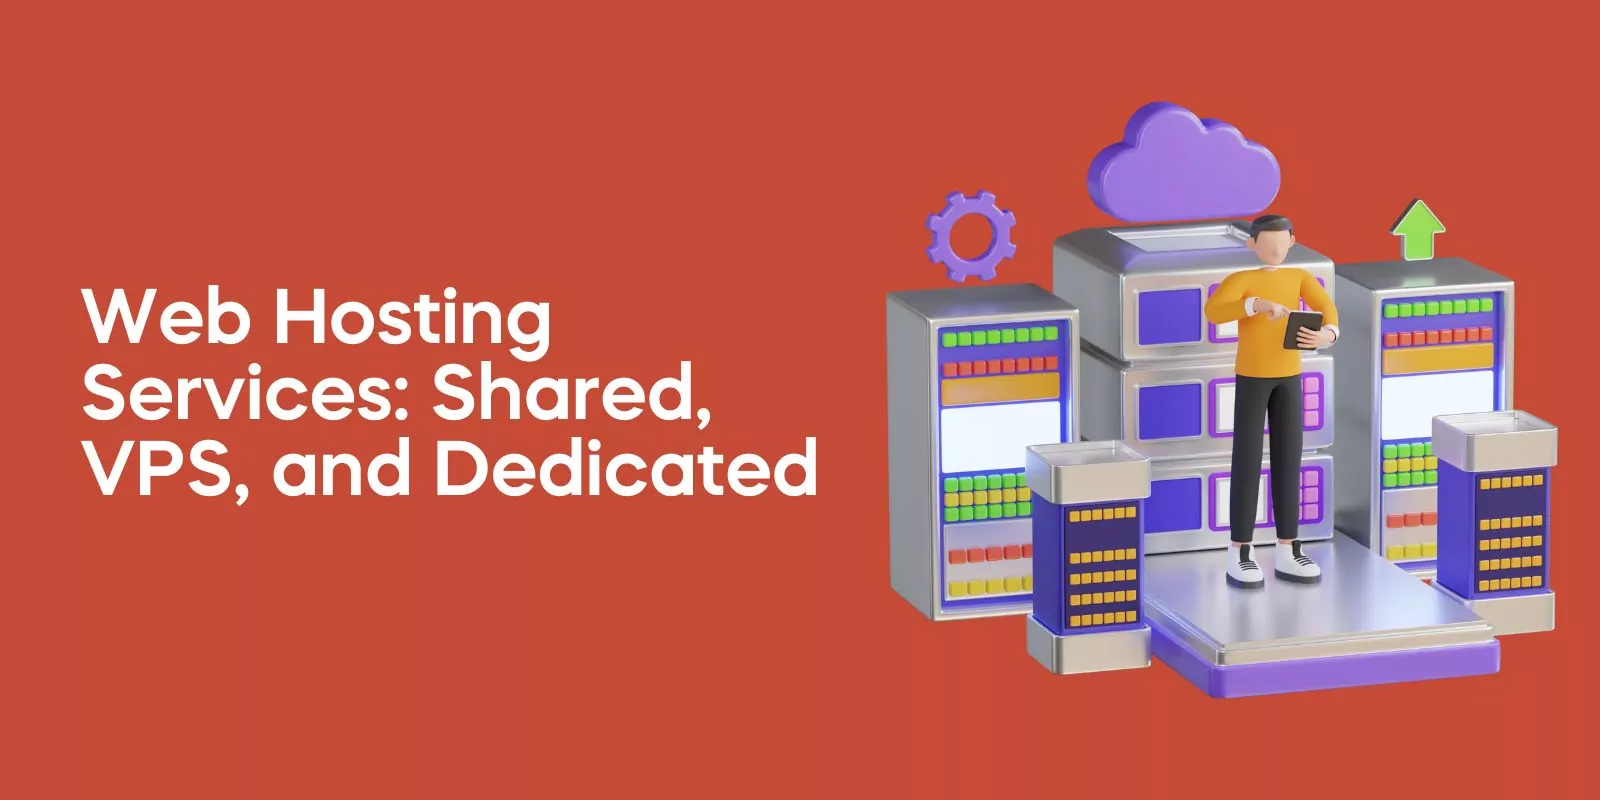 Web Hosting Services: Shared, VPS, and Dedicated